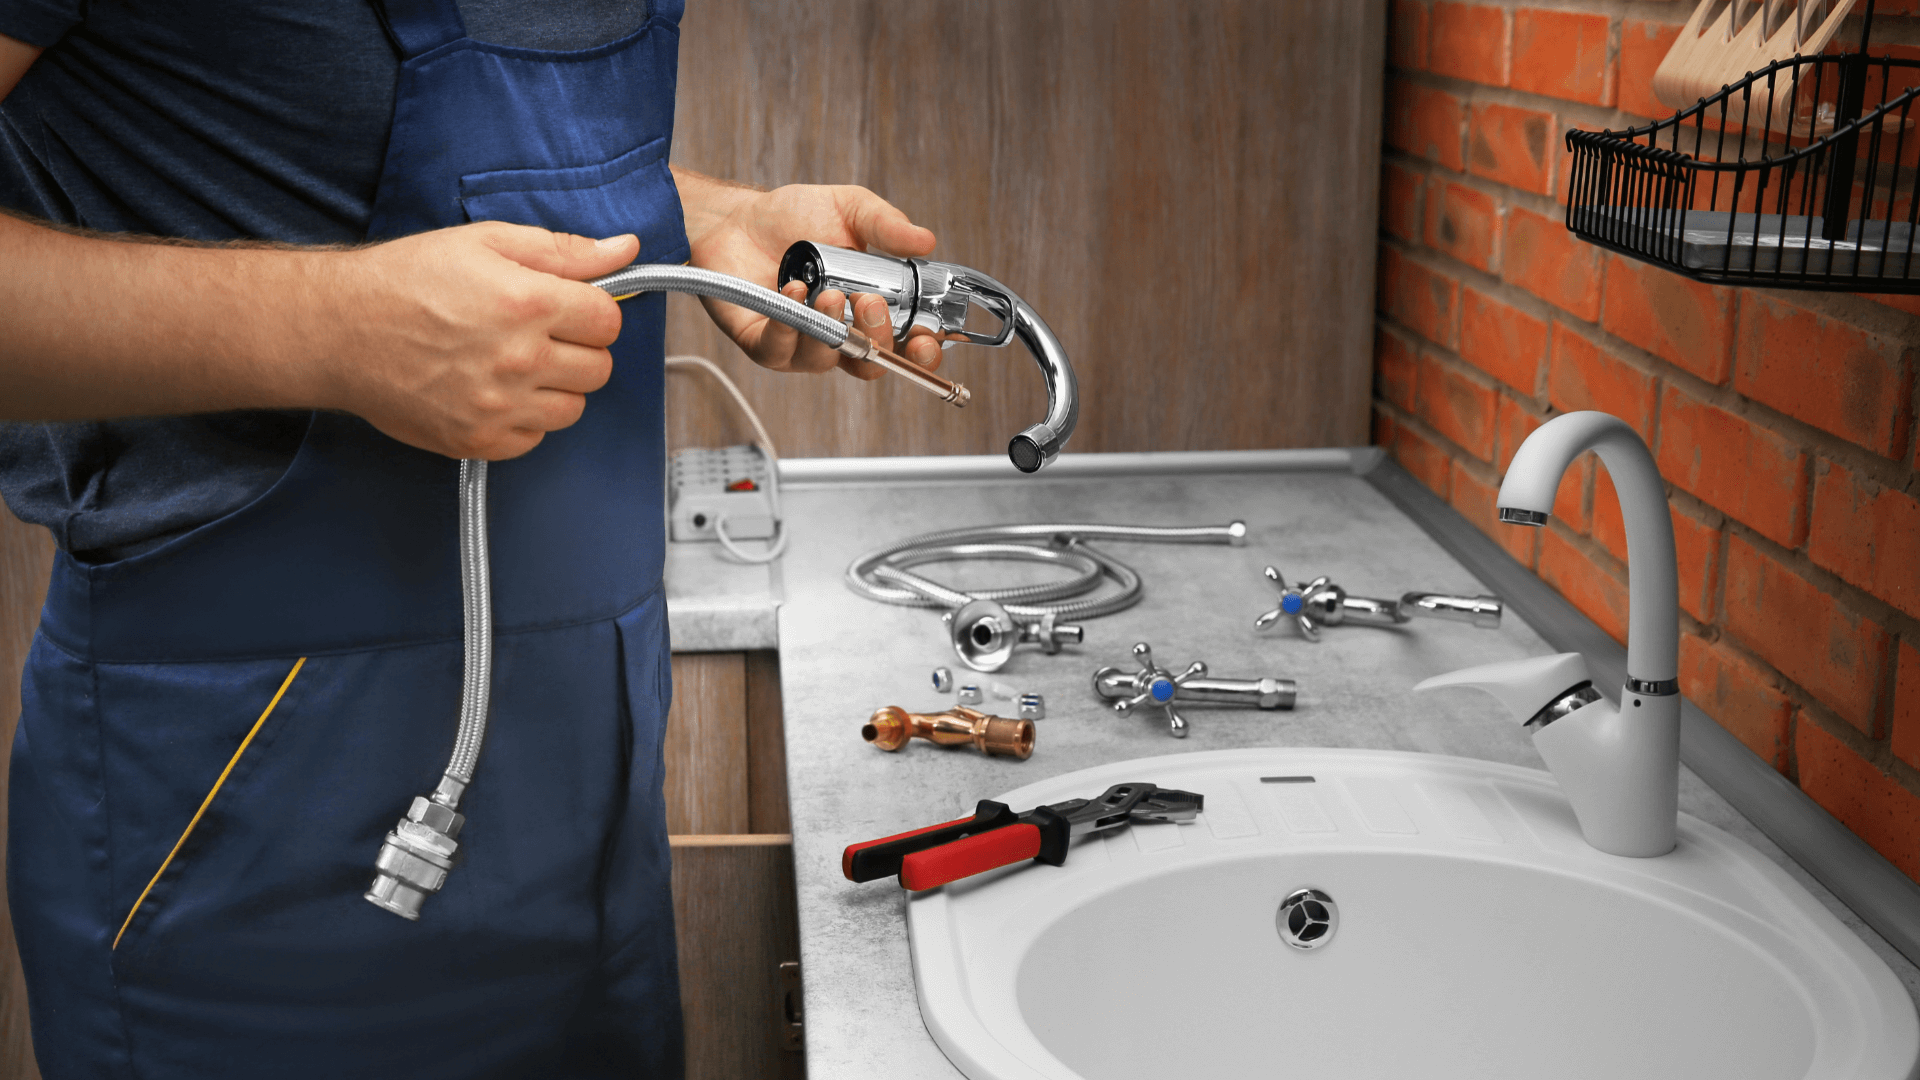 Maintaining your plumbing system is the key to longevity. Knowing when to invest in plumbing upgrades may save you from major repair costs. Contact America's Plumbing today!